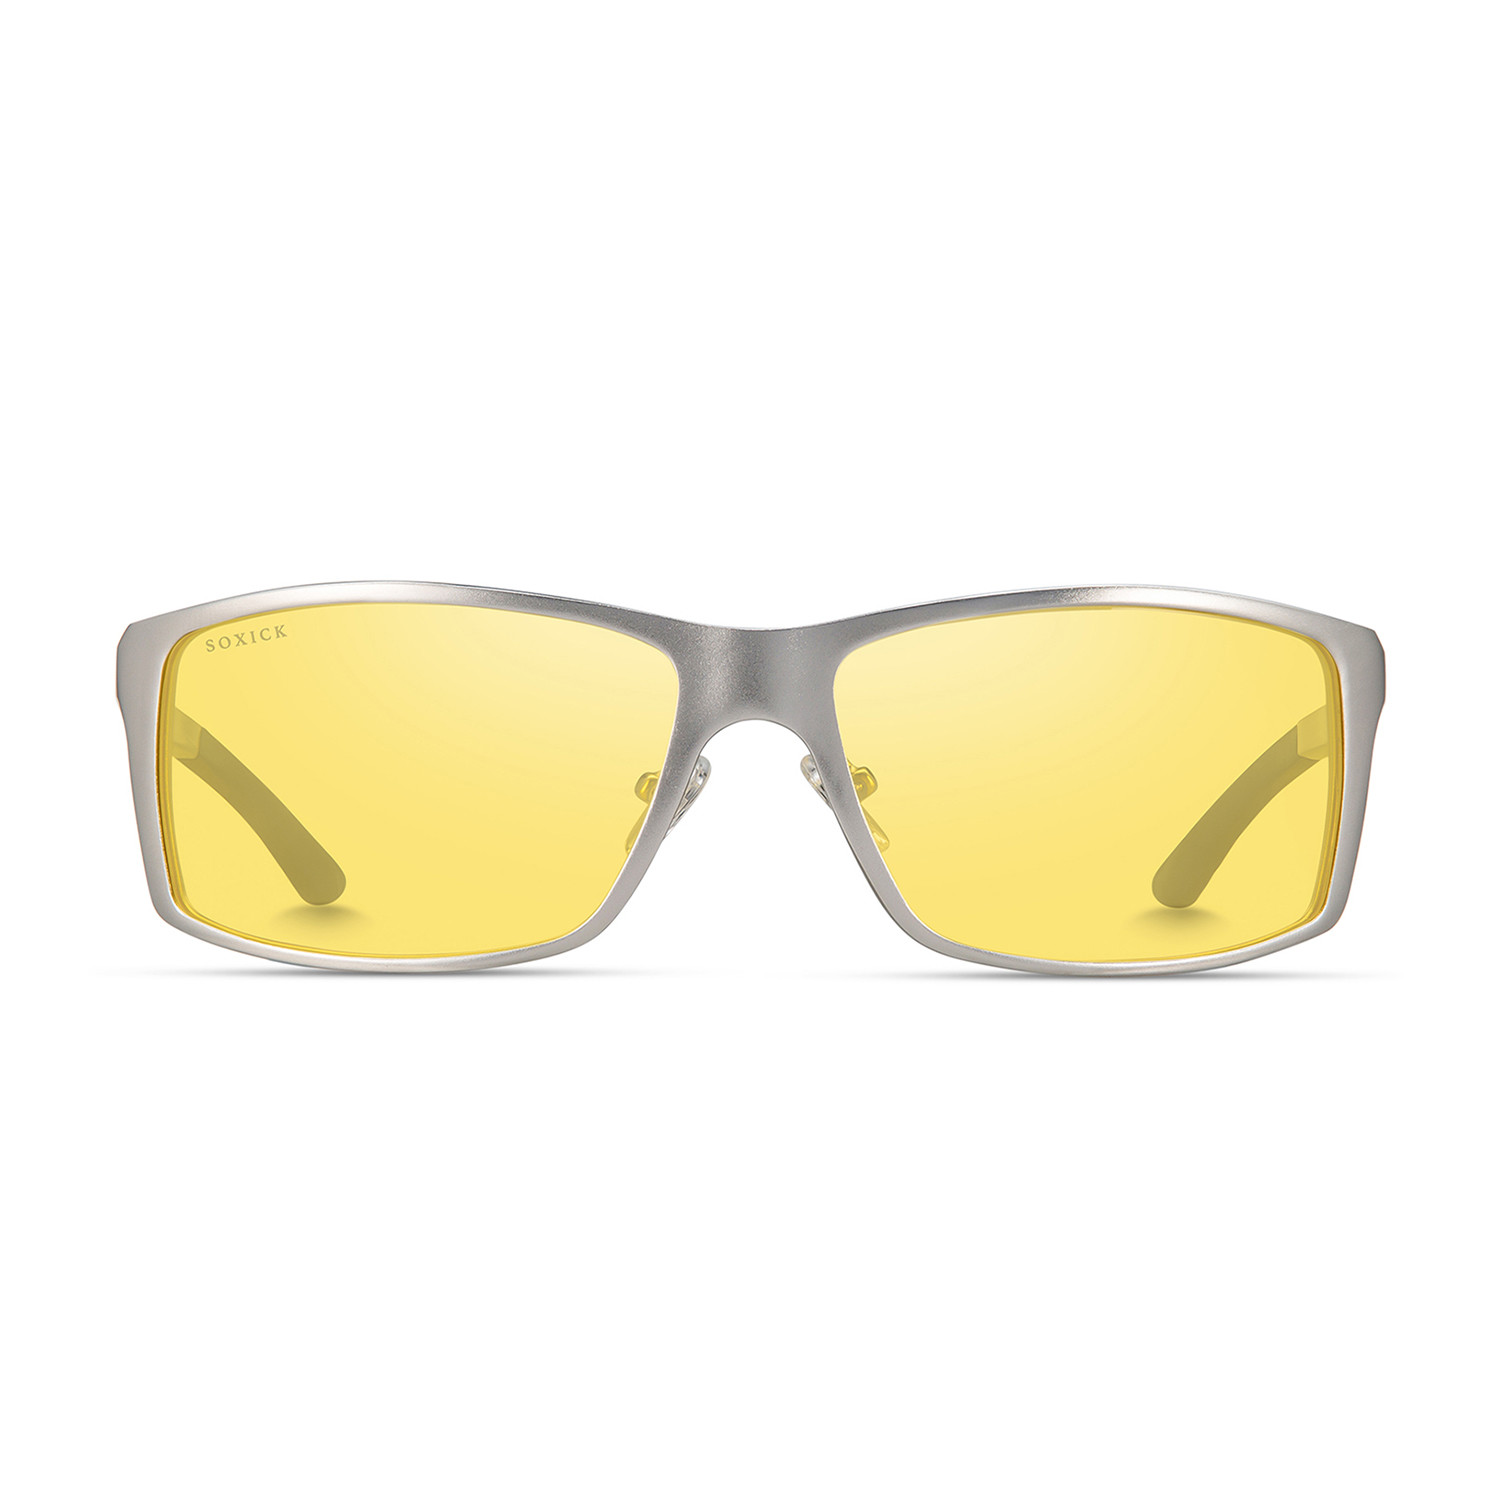 Night Vision Glasses 888 2 Soxick Touch Of Modern